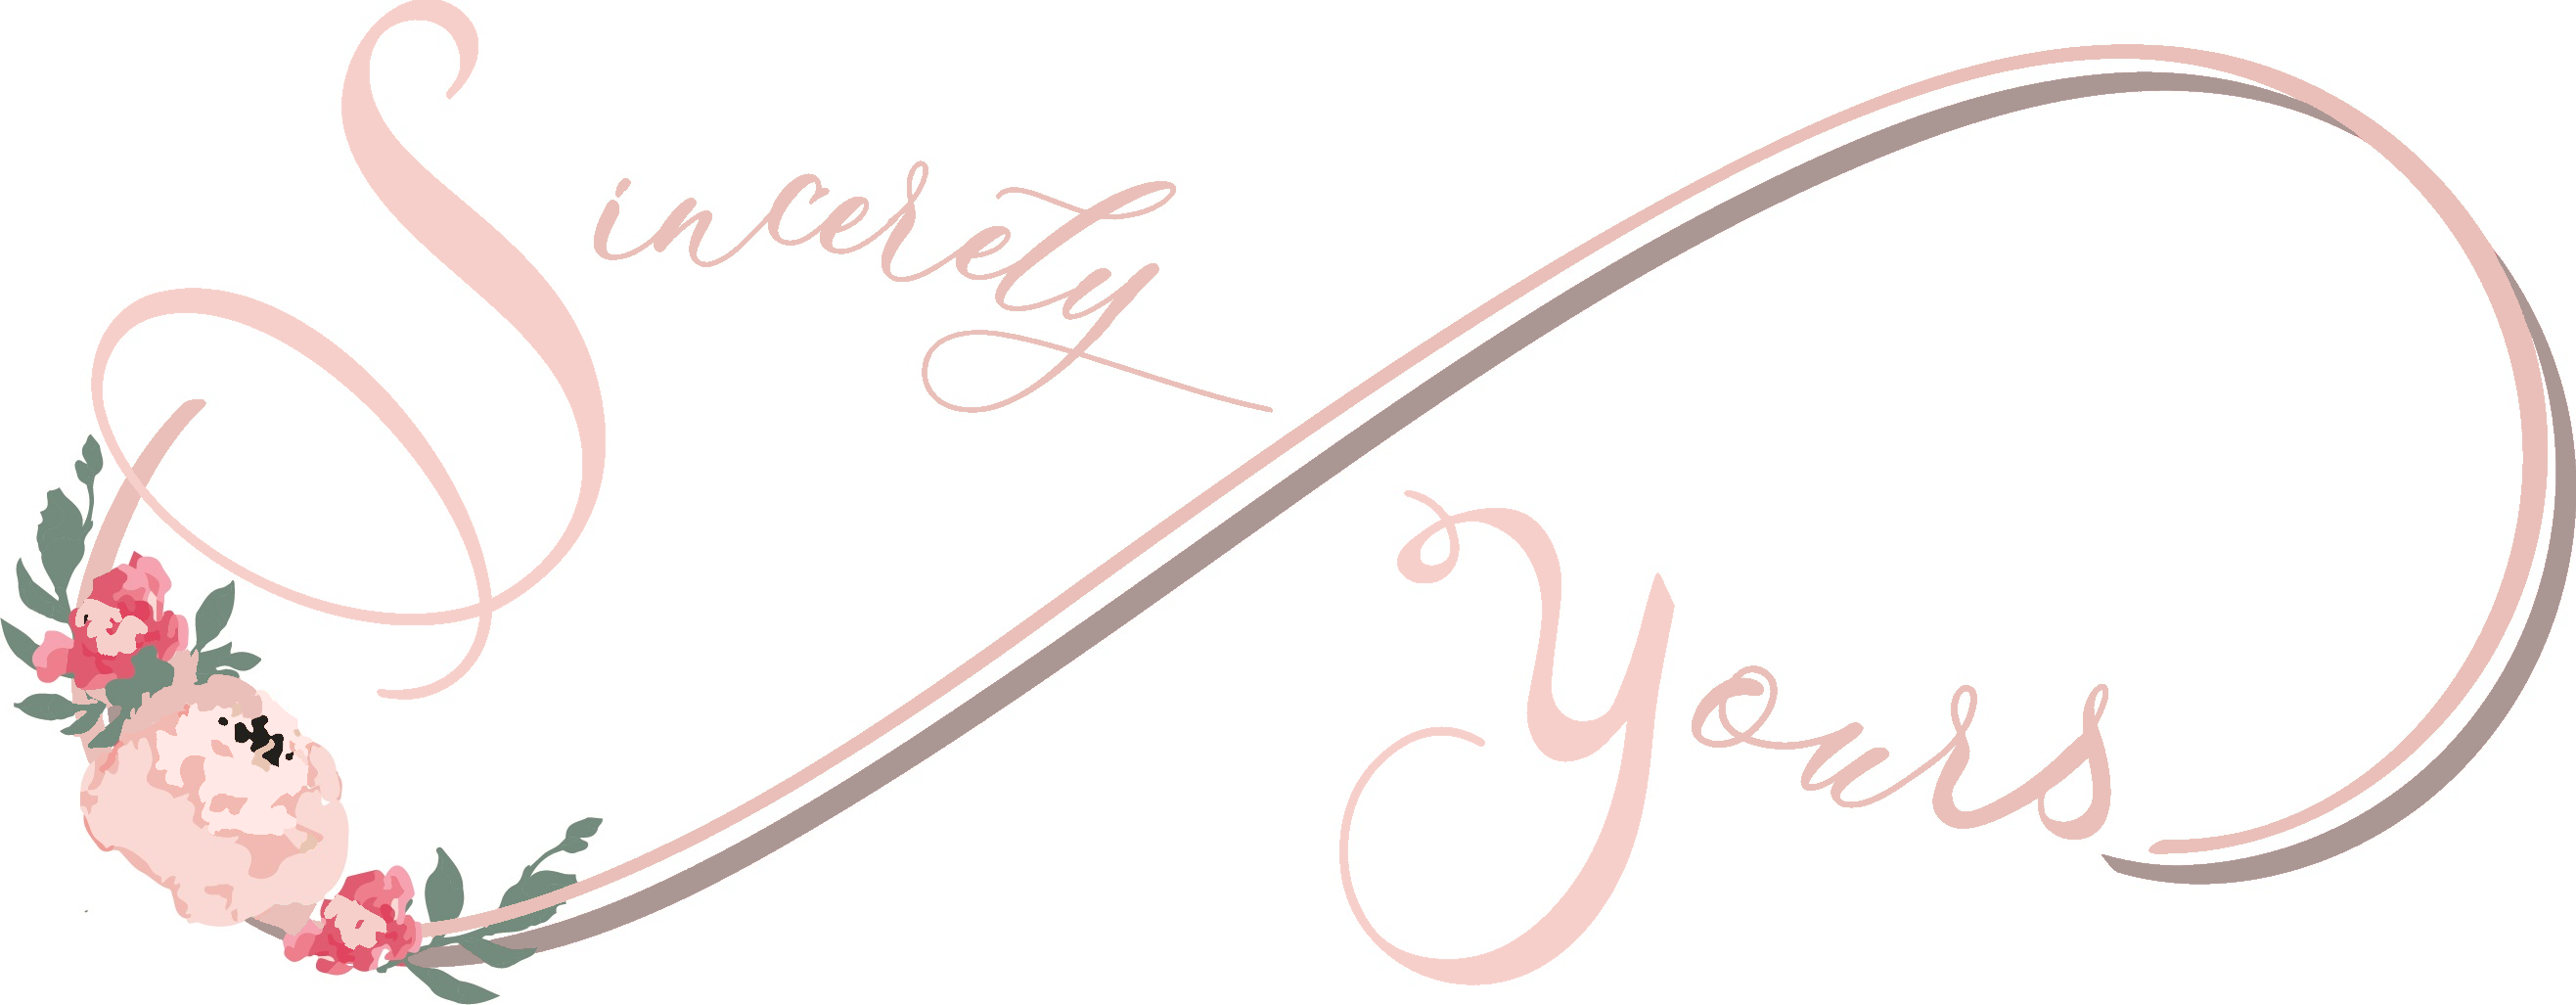 Sincerely Yours Weddings and Events